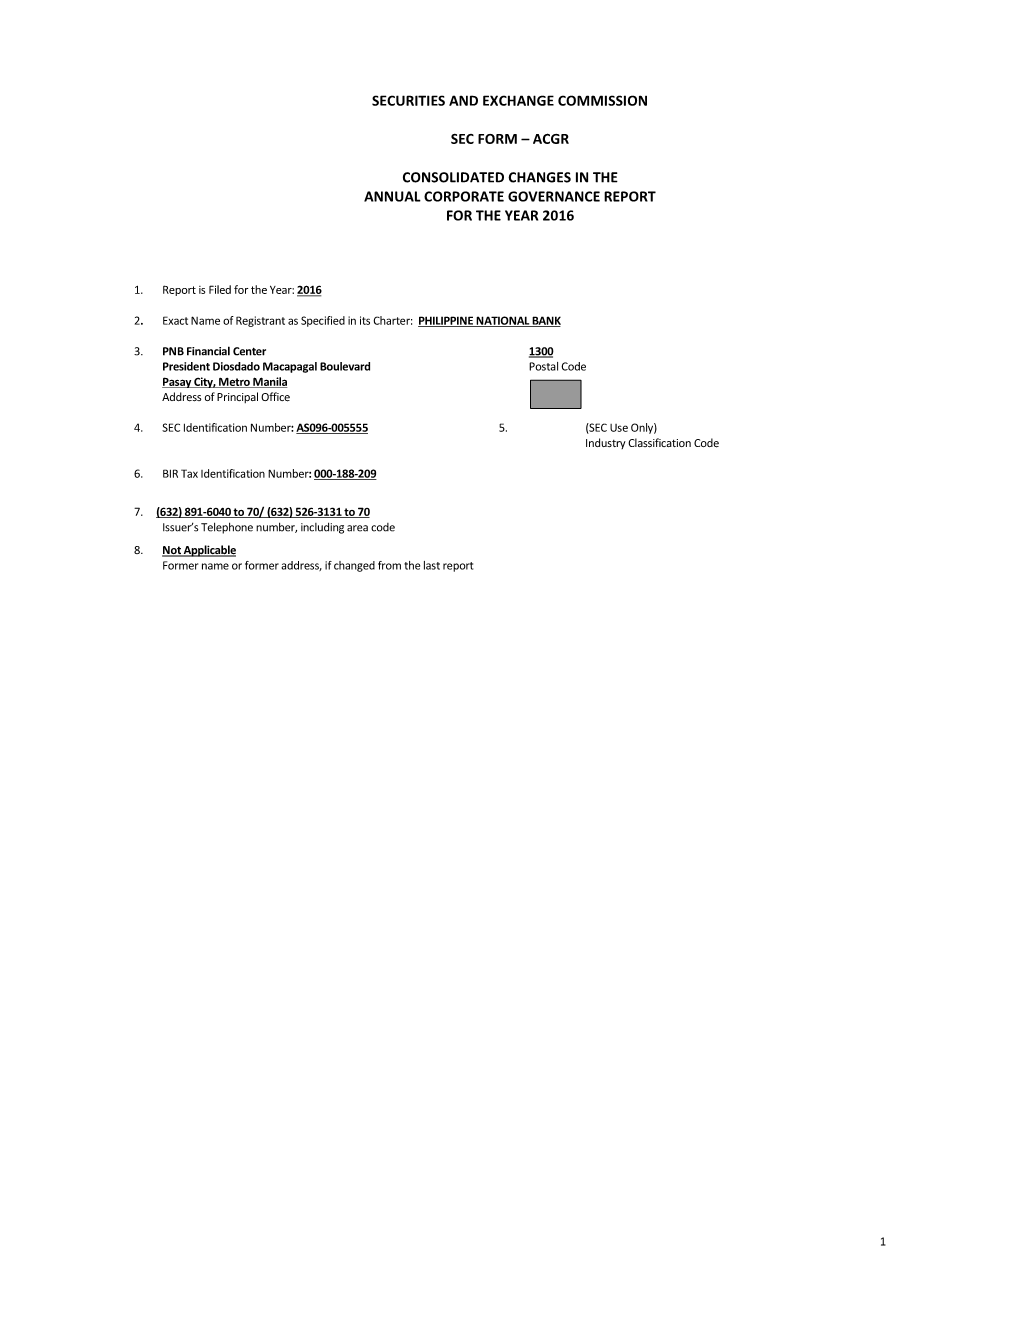 Securities and Exchange Commission Sec Form